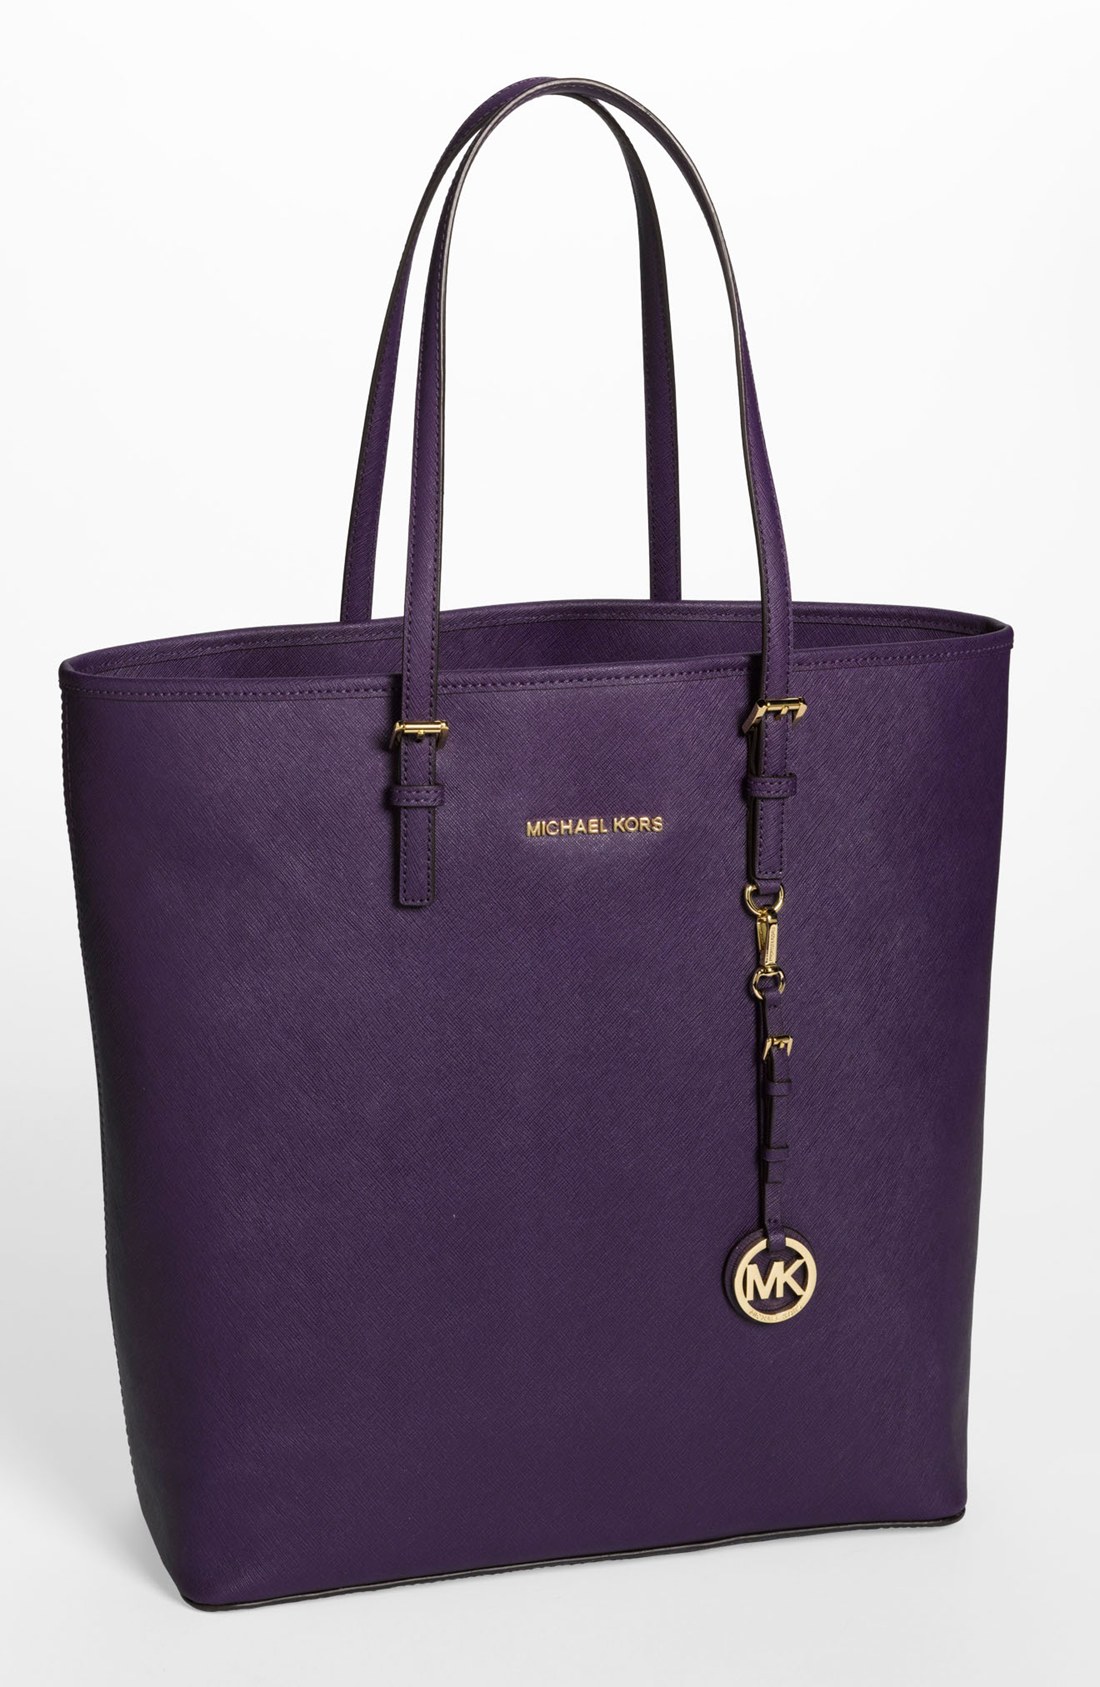 Michael By Michael Kors Jet Set Travel Saffiano Leather Tote Extra Large in Black (Iris) | Lyst